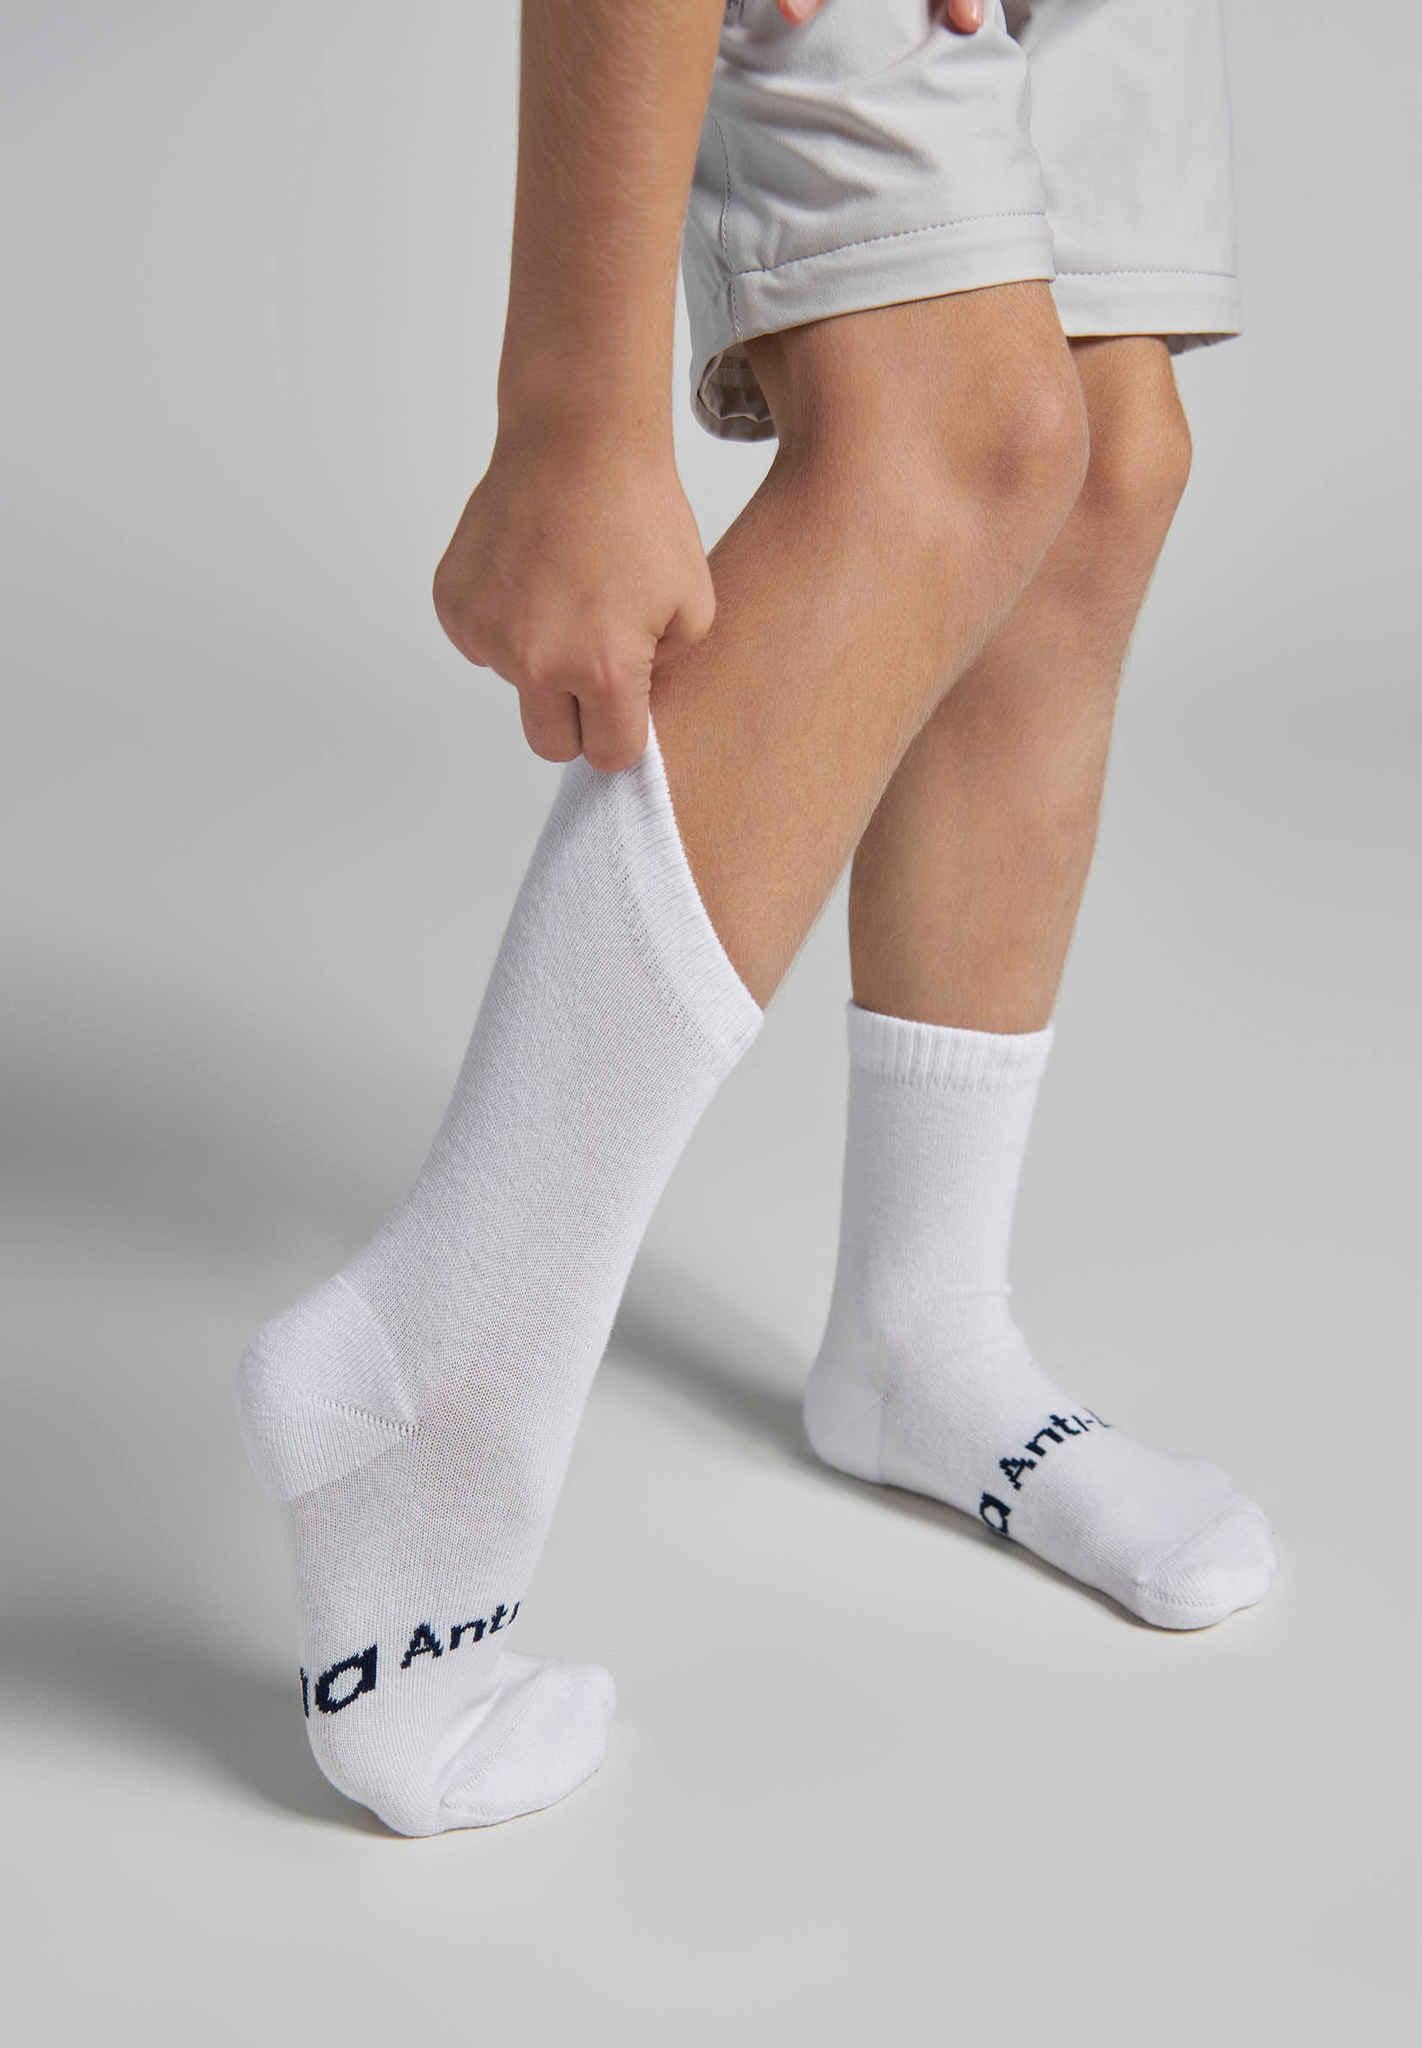 <tc>Reima</tc>  Anti-Bite socks - repelling insects Insect